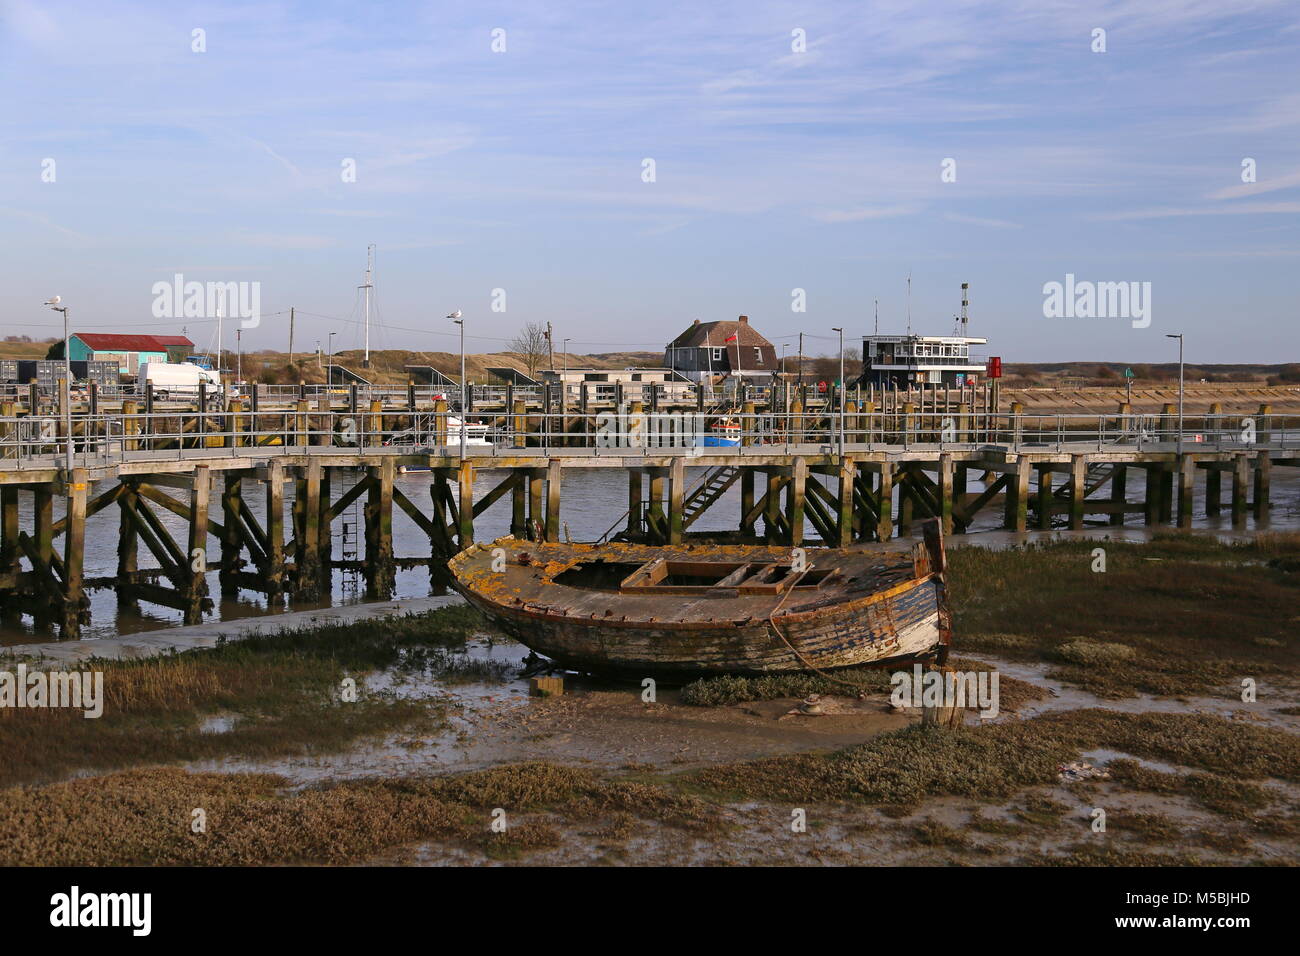 Entrance channel to Rye Harbour, East Sussex, England, Great Britain, United Kingdom, UK, Europe Stock Photo